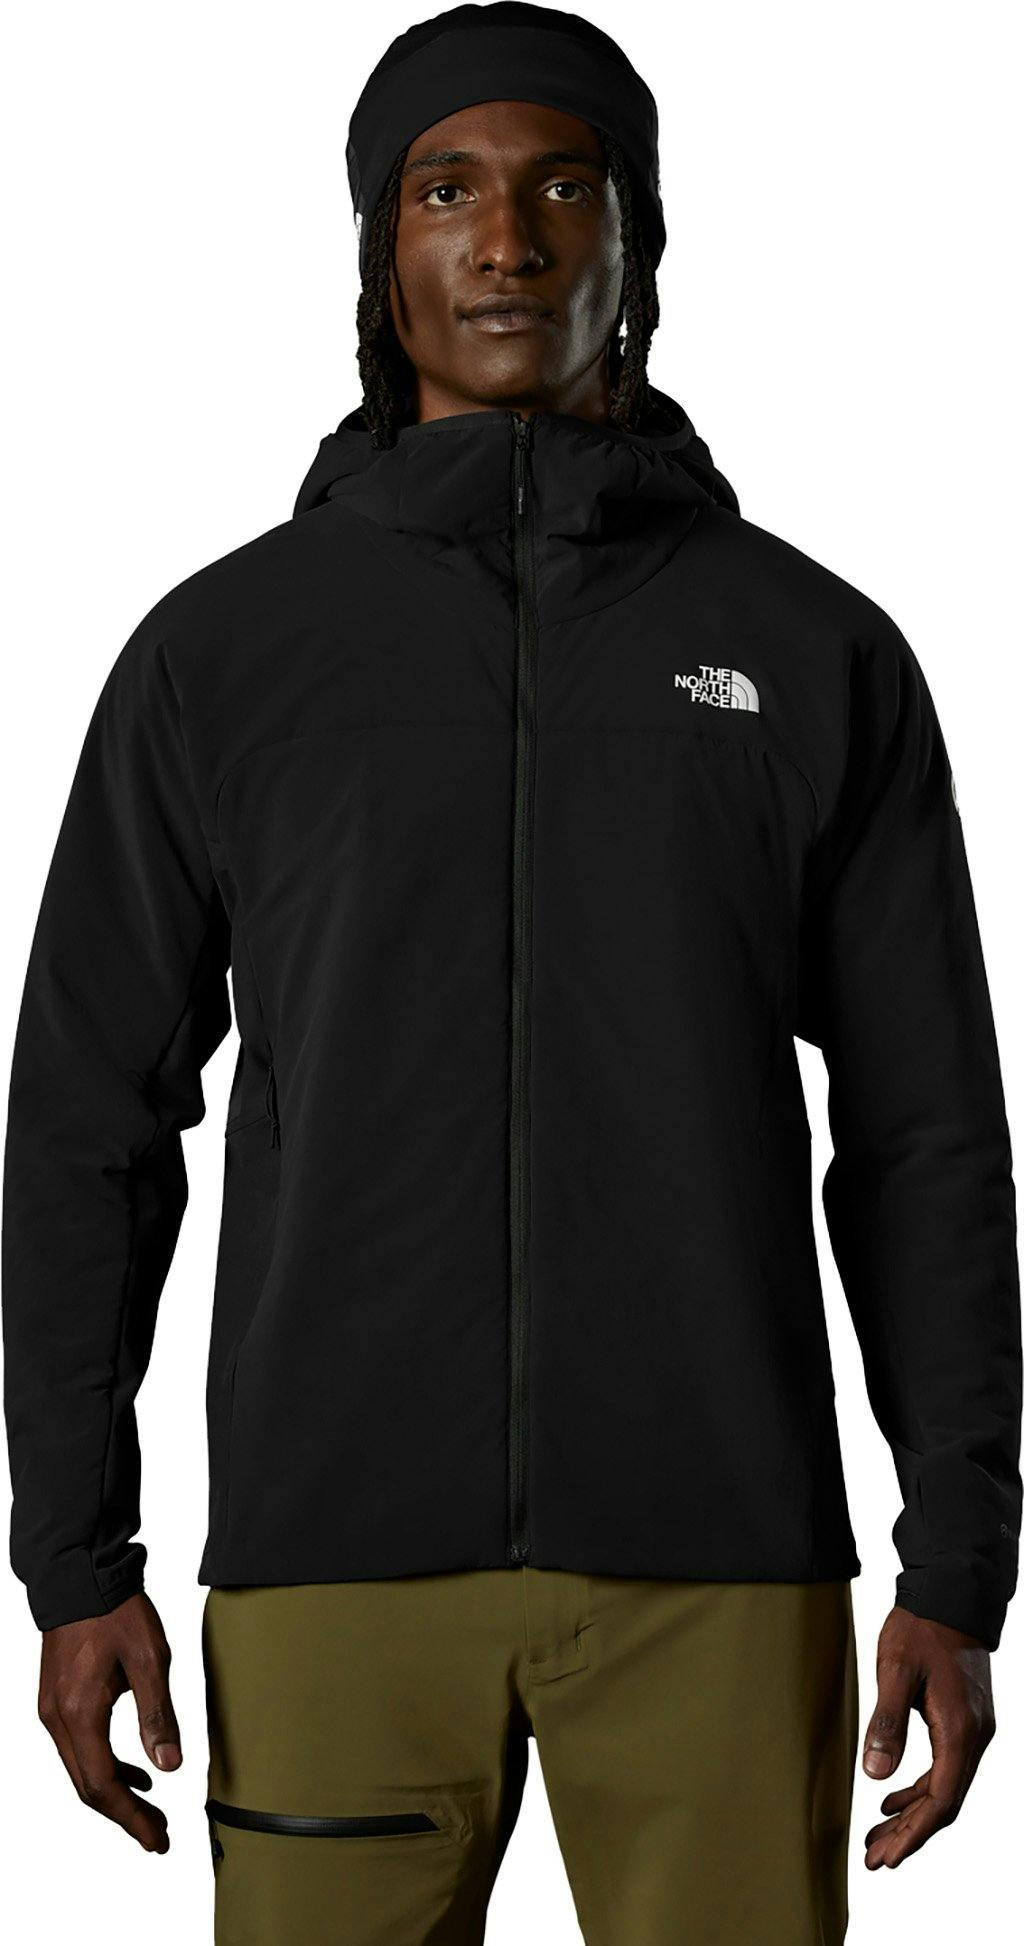 Product image for Casaval Summit Series Hybrid Hoodie - Men’s